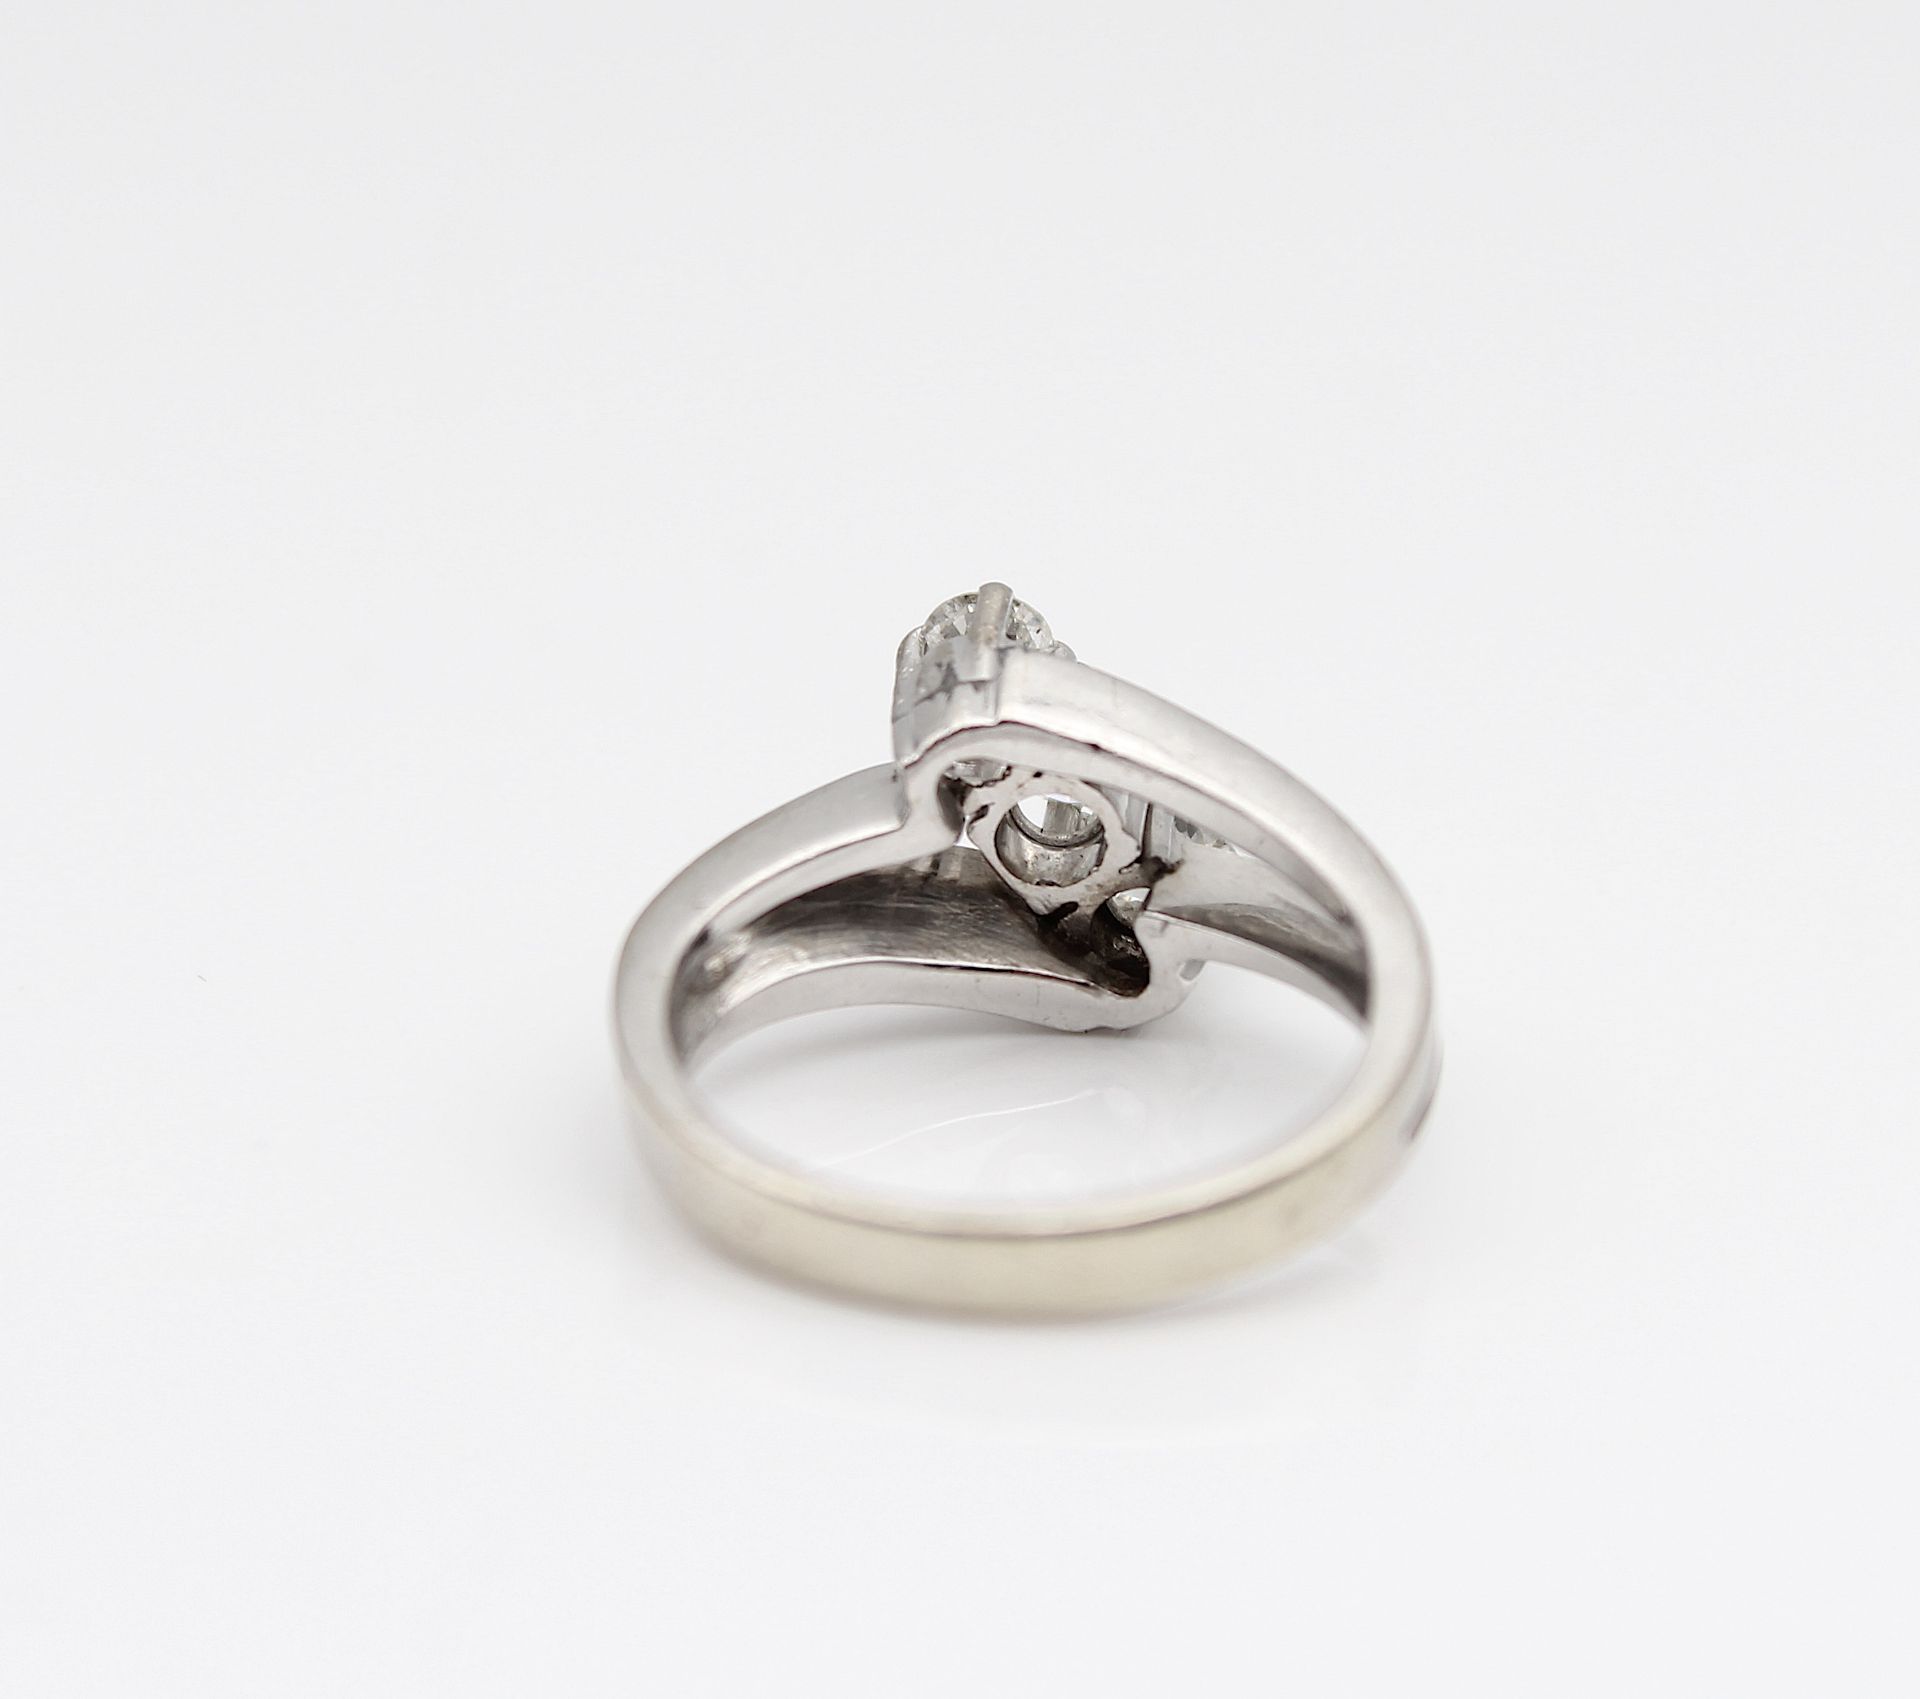 Classic vintage ring with diamonds - Image 4 of 4